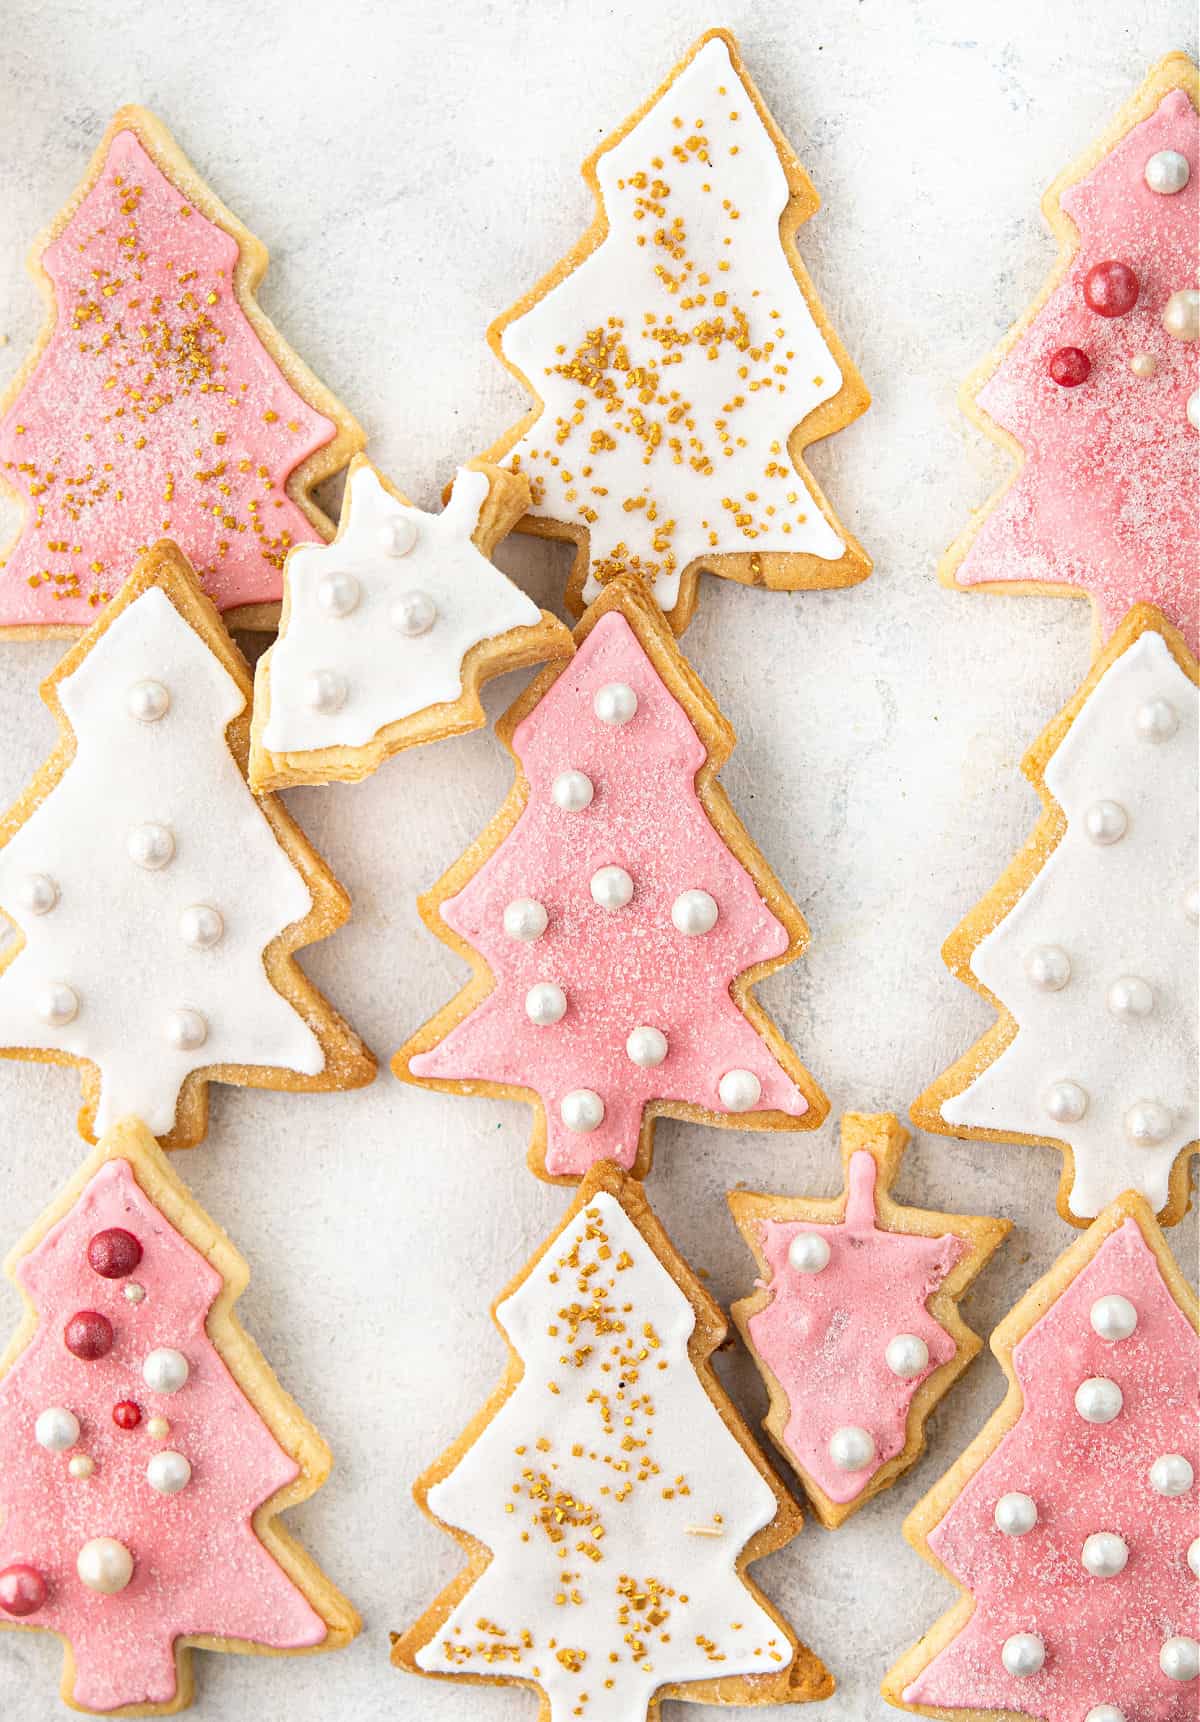 Pink and white iced cookies on parchment paper.